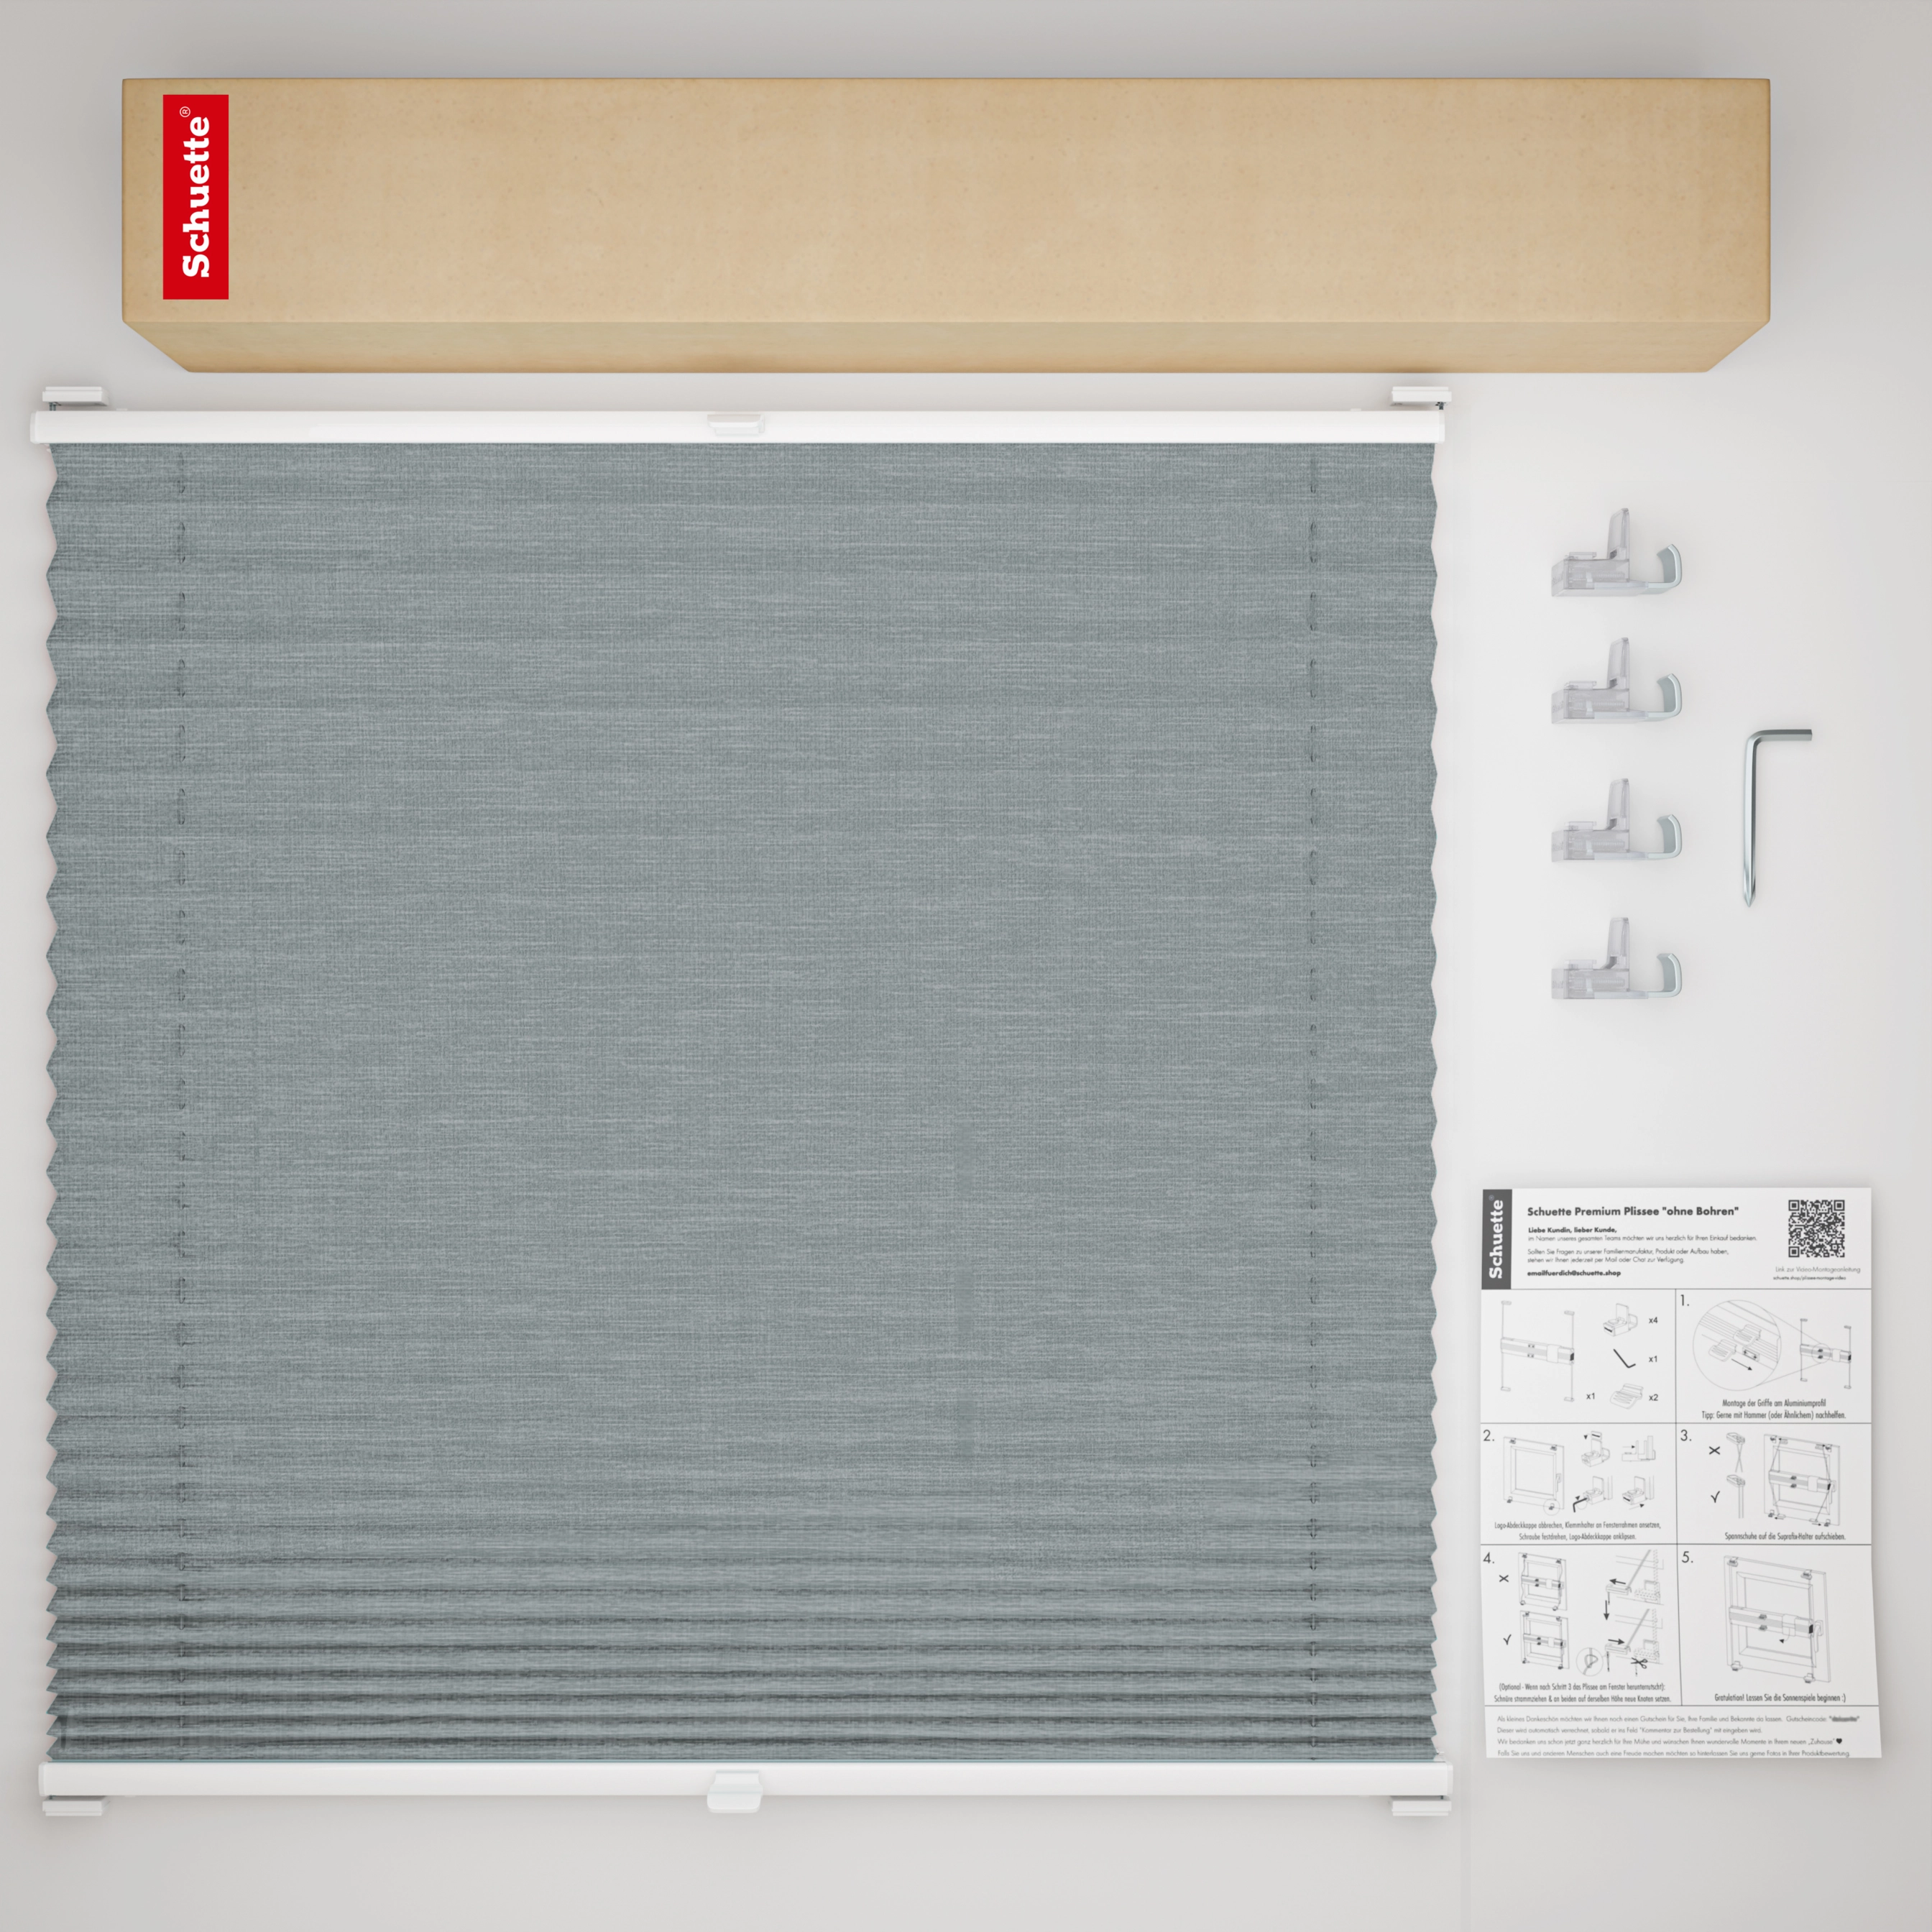 Schuette® Pleated Blind Made to Measure without Drilling • Suprafix Clamp holder “Incognito" Standard” • Melange Collection: Rocky Mountain (Grey) • Profile Colour: White